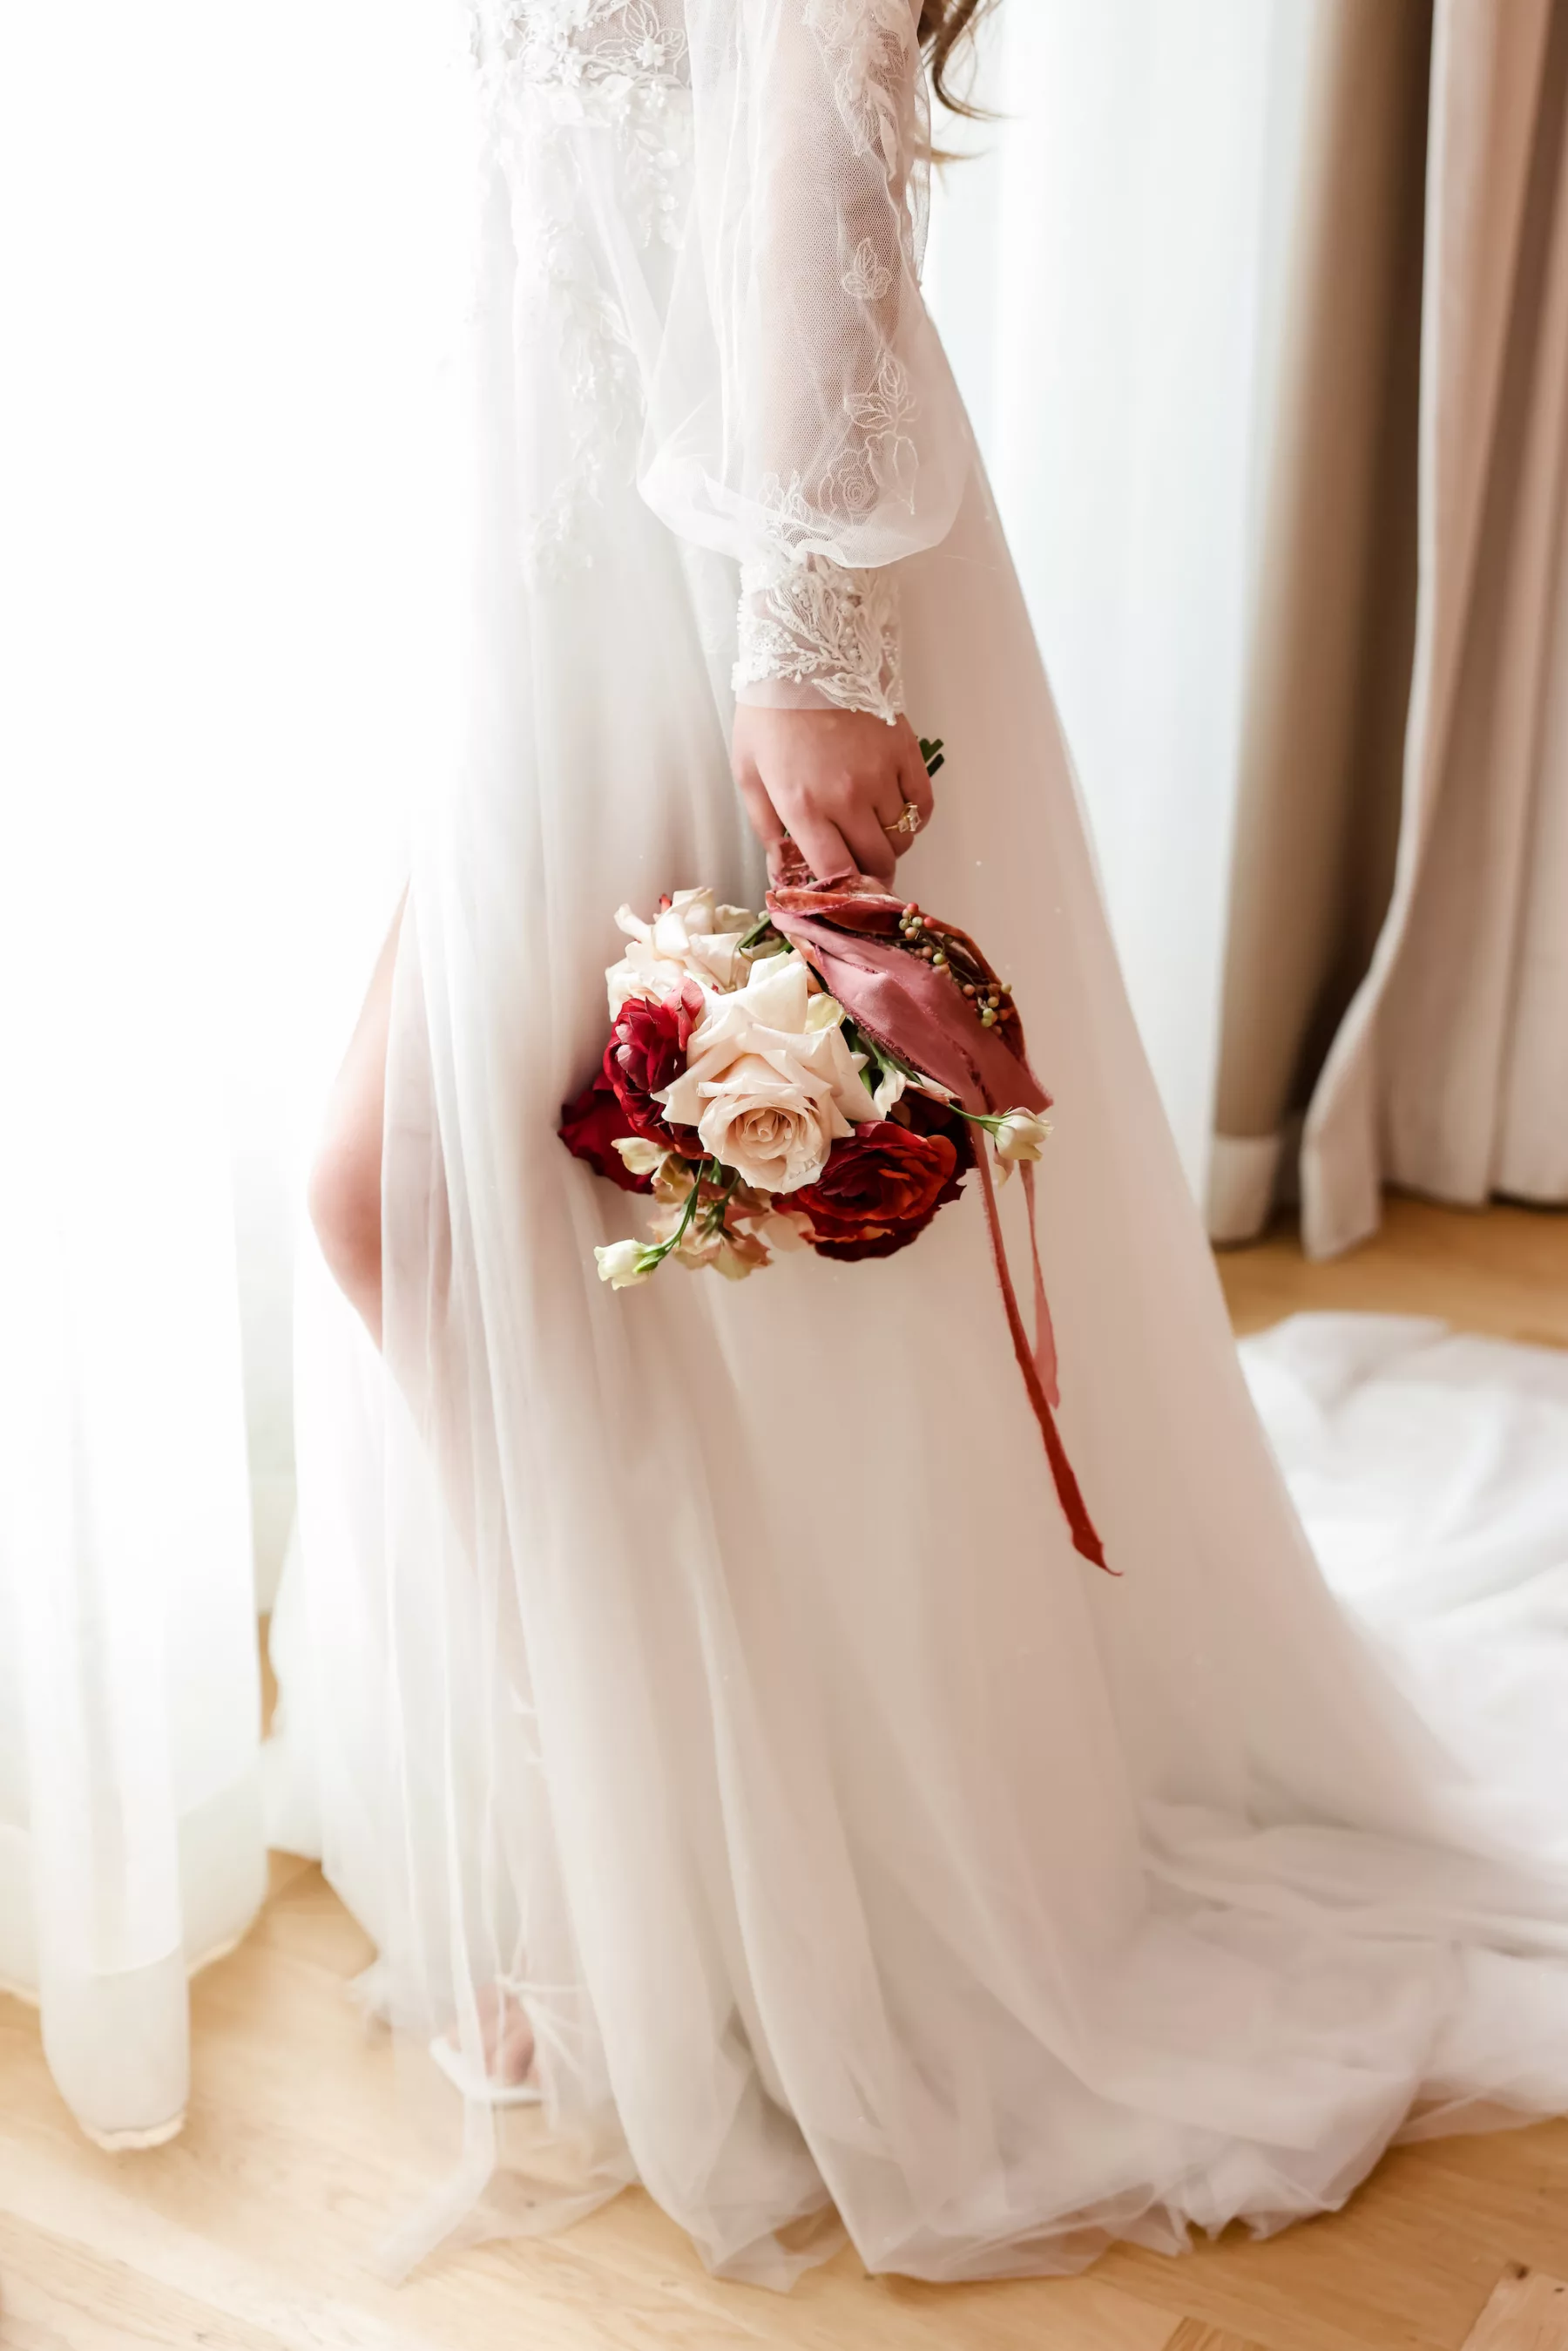 White and Red Rose Wedding Bouquet Ideas | White Lace and Tulle Cold Shoulder A-Line Wedding Dress Inspiration | Boutique Truly Forever Bridal Tampa